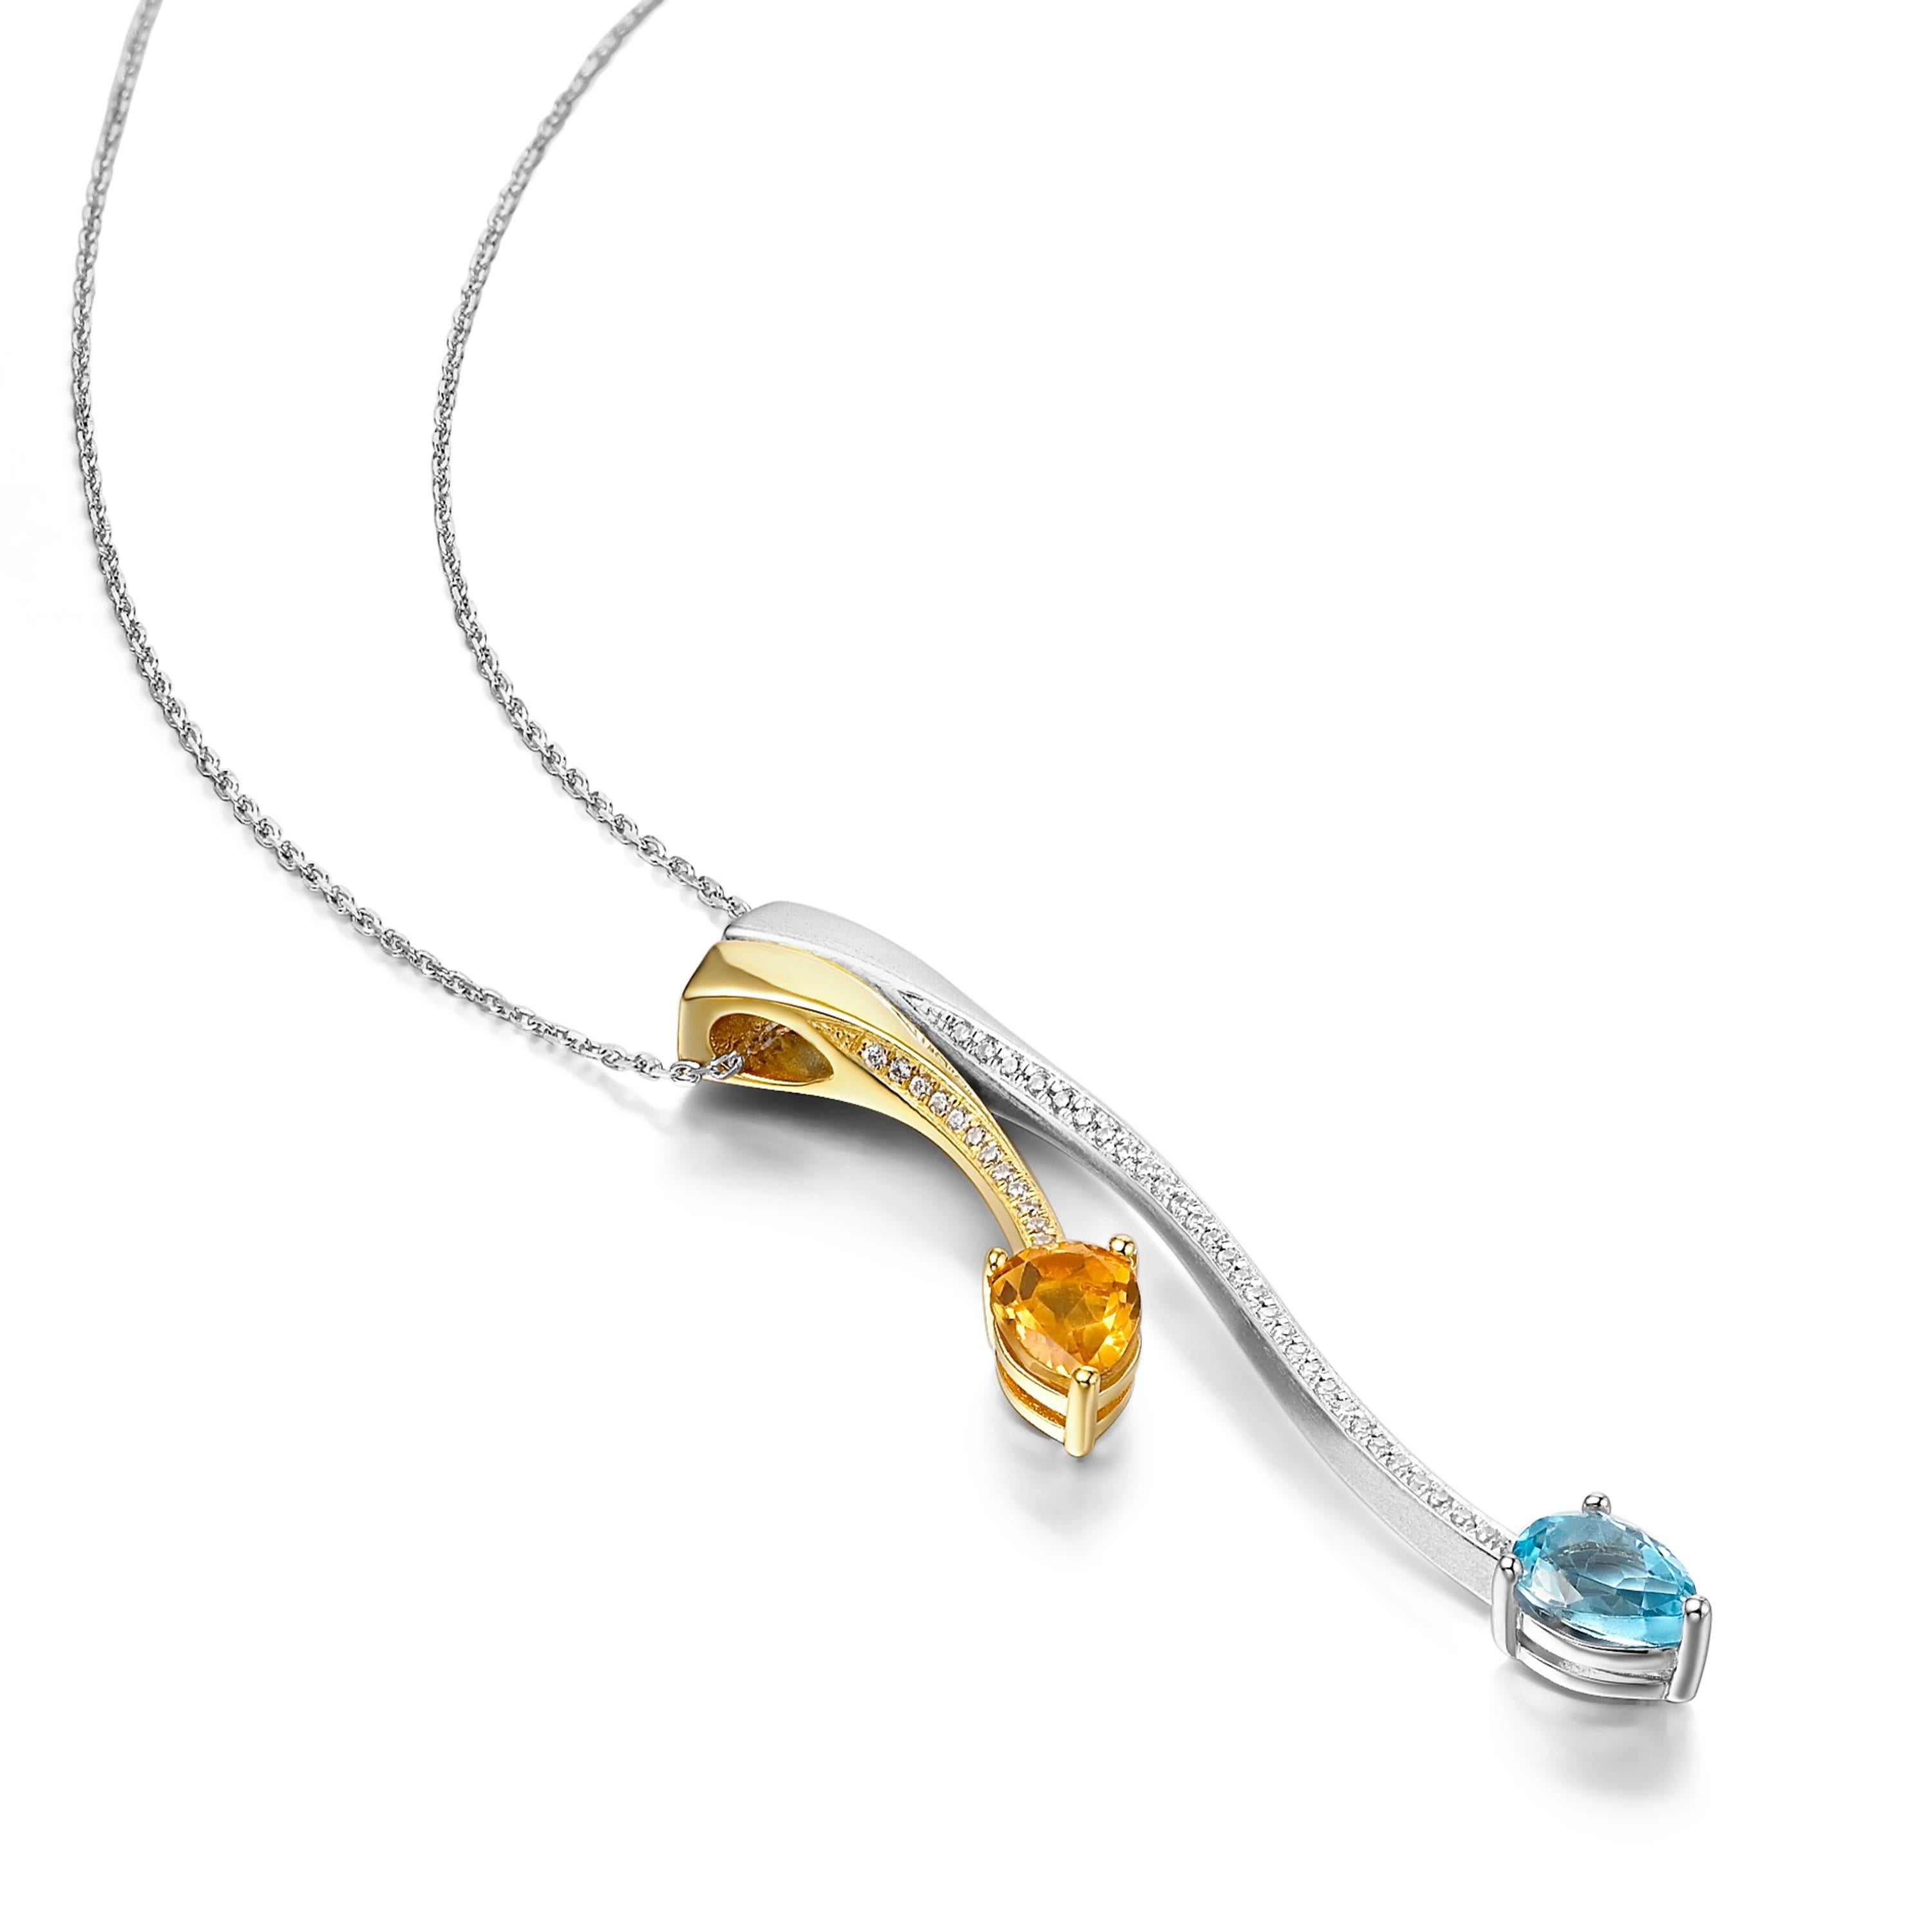 Description:
Shooting Star two-tone pendant with pear cut blue topaz and citrine, and Hearts and Arrows* white cubic zirconia, set in brush polished white rhodium plate and mirror polished 18ct yellow gold plate on sterling silver.

*Hearts and